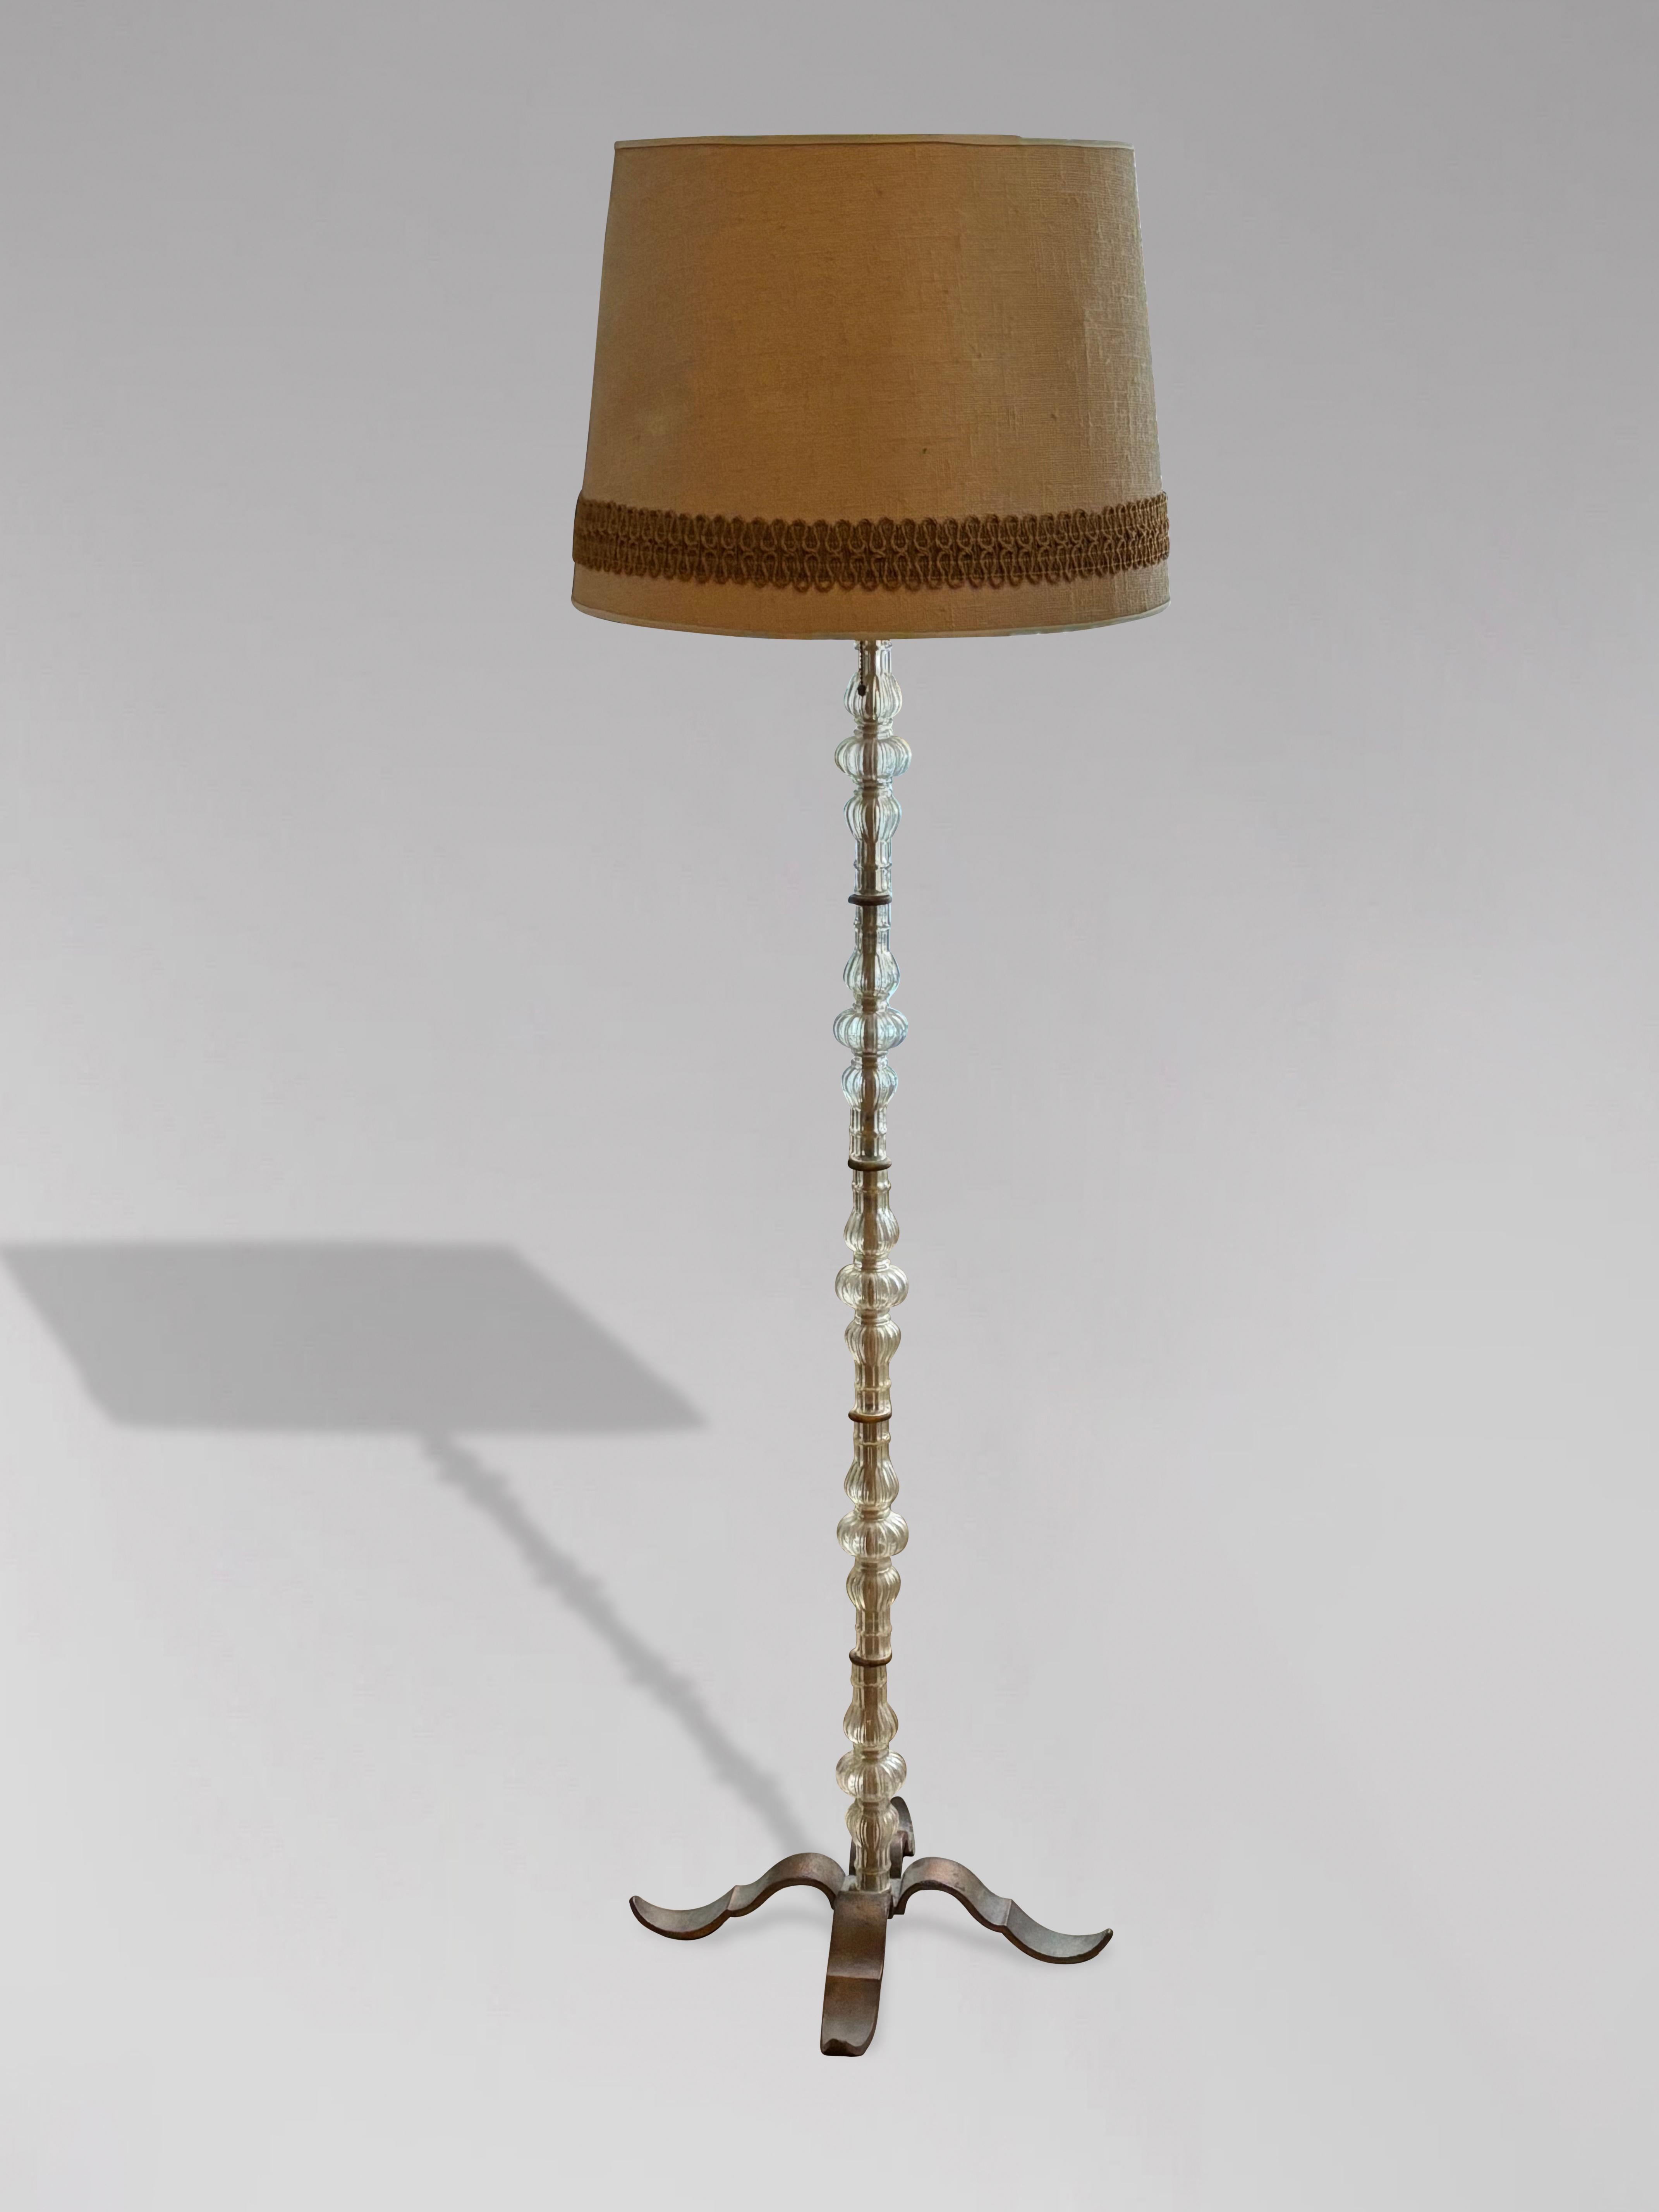 A stylish, unusual and top quality mid 20th century, French 1960s glass and brass floor lamp. The original lamp shade above a cut glass and brass stem, all standing on four splayed supports. The condition is excellent for its age and in good working